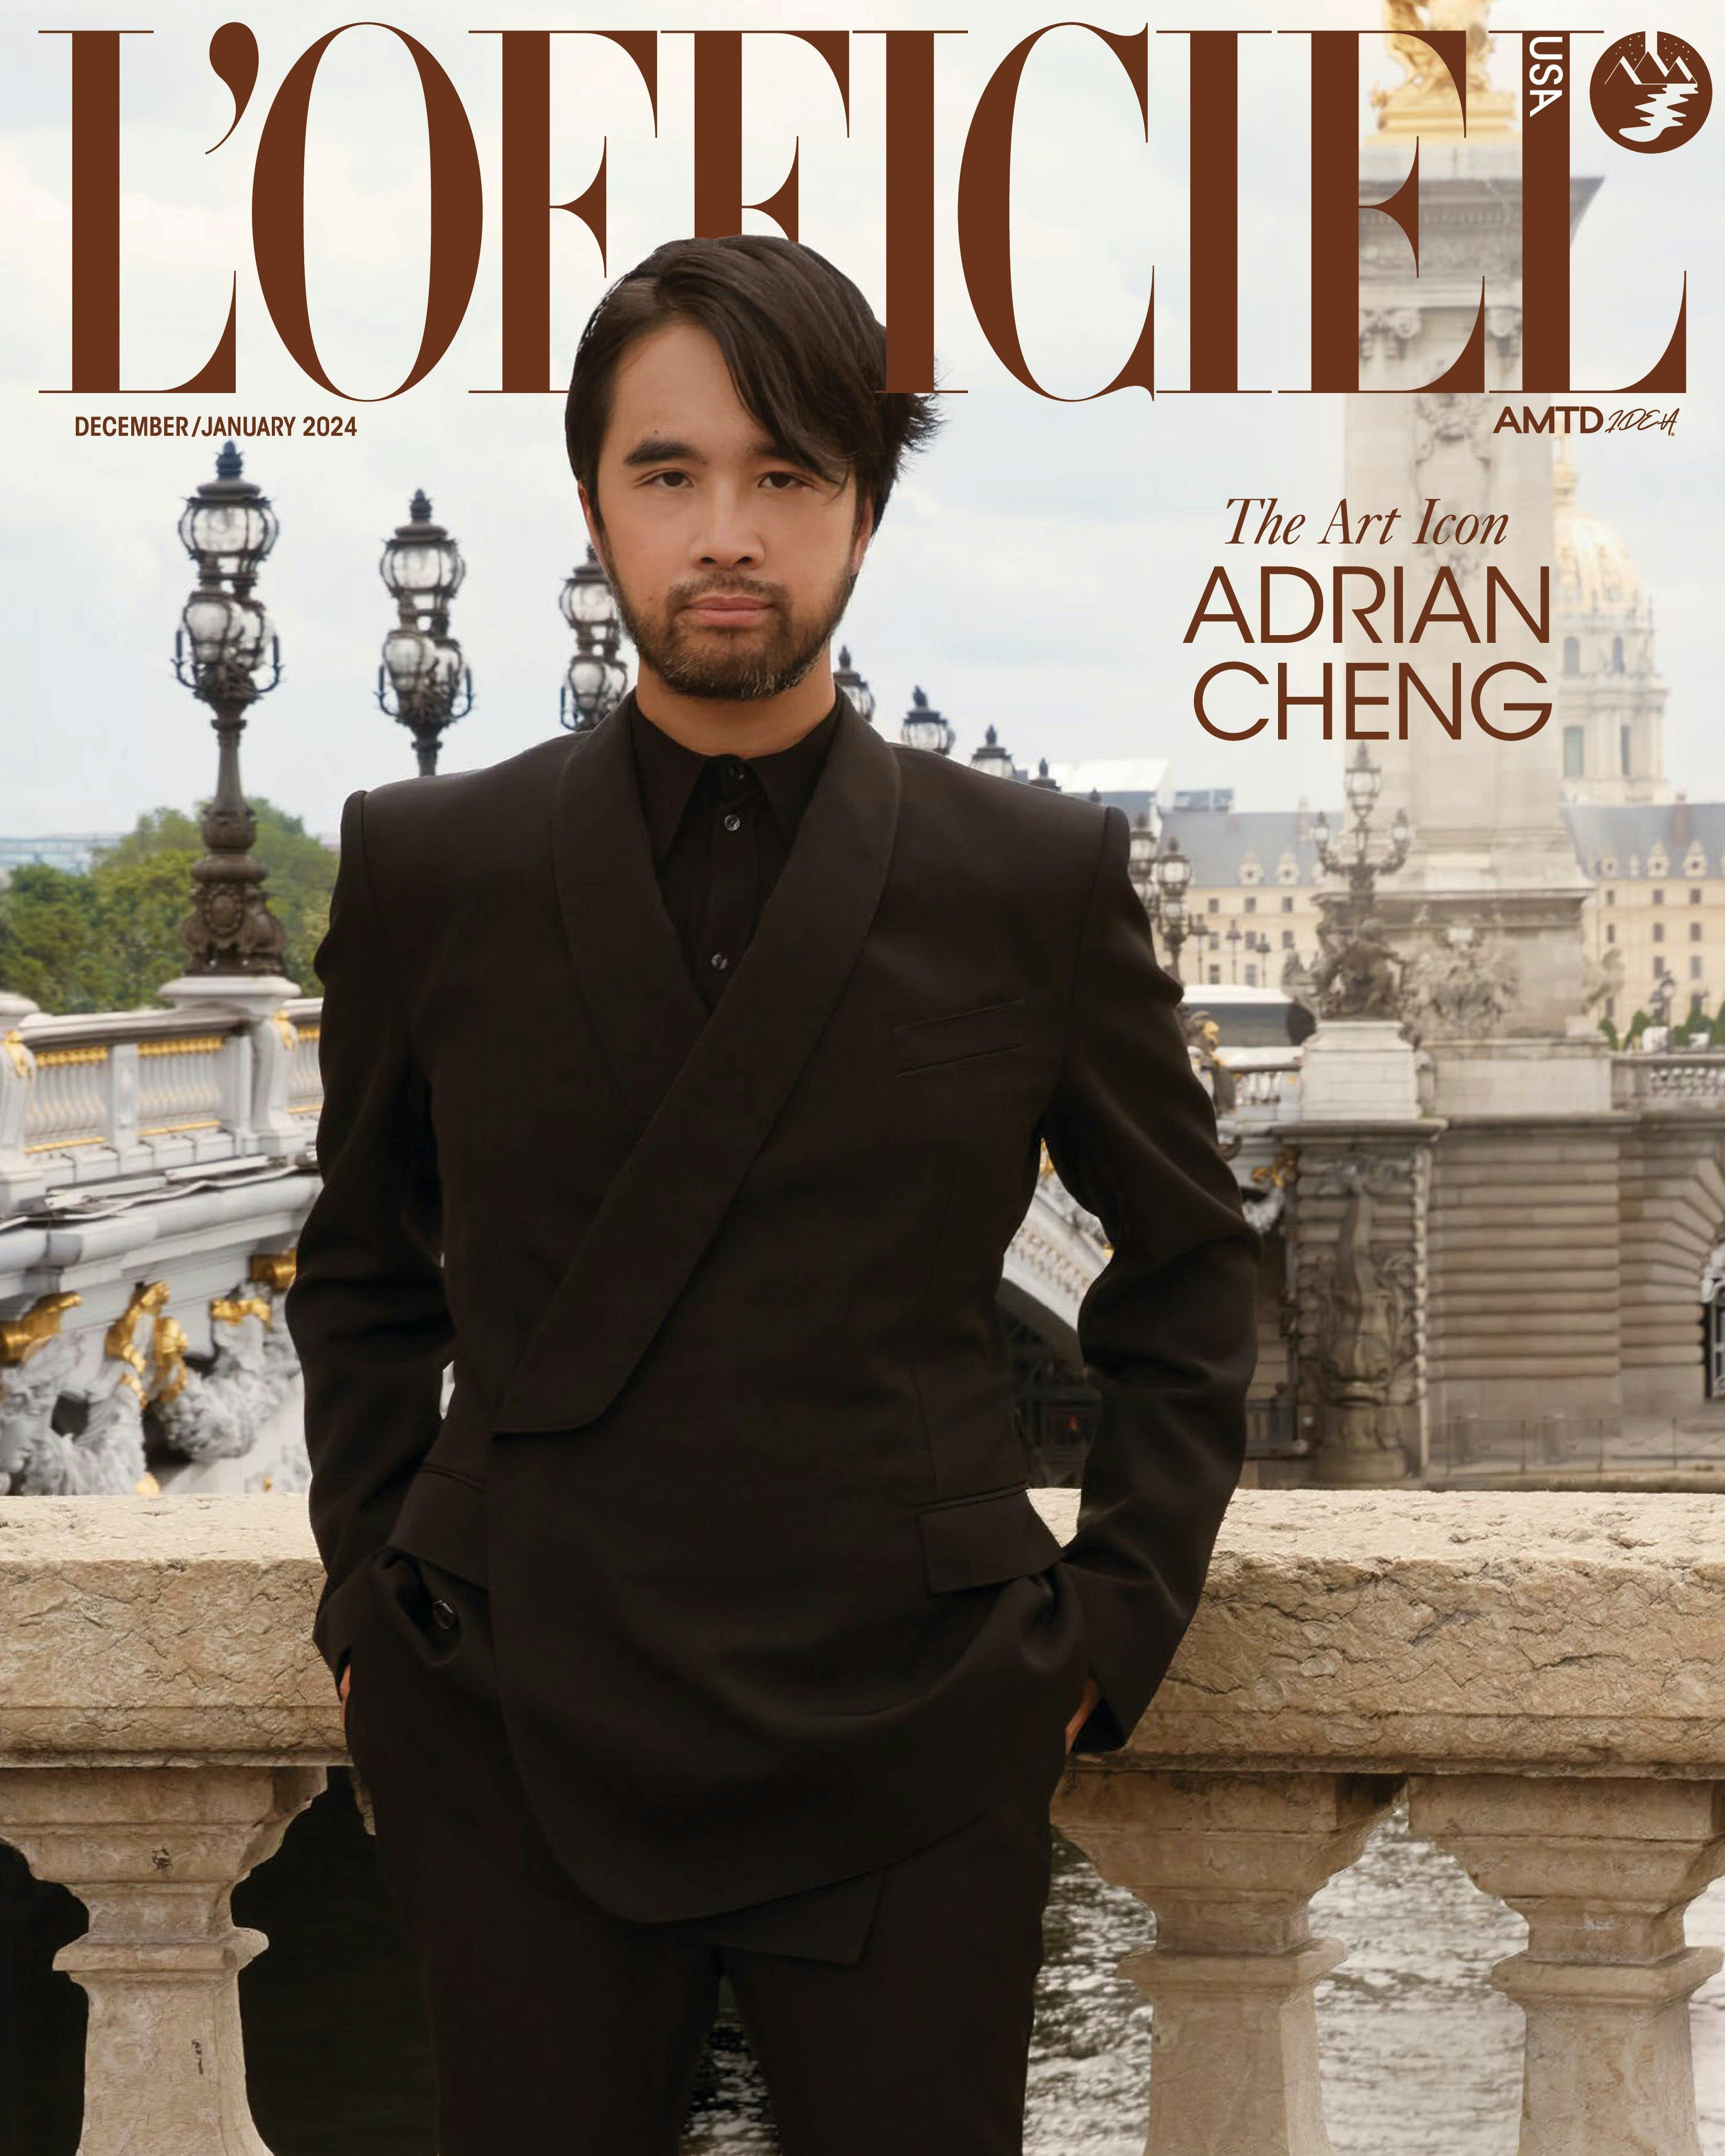 L'OFFICIEL USA December/January 2024 - Adrian Cheng Cover